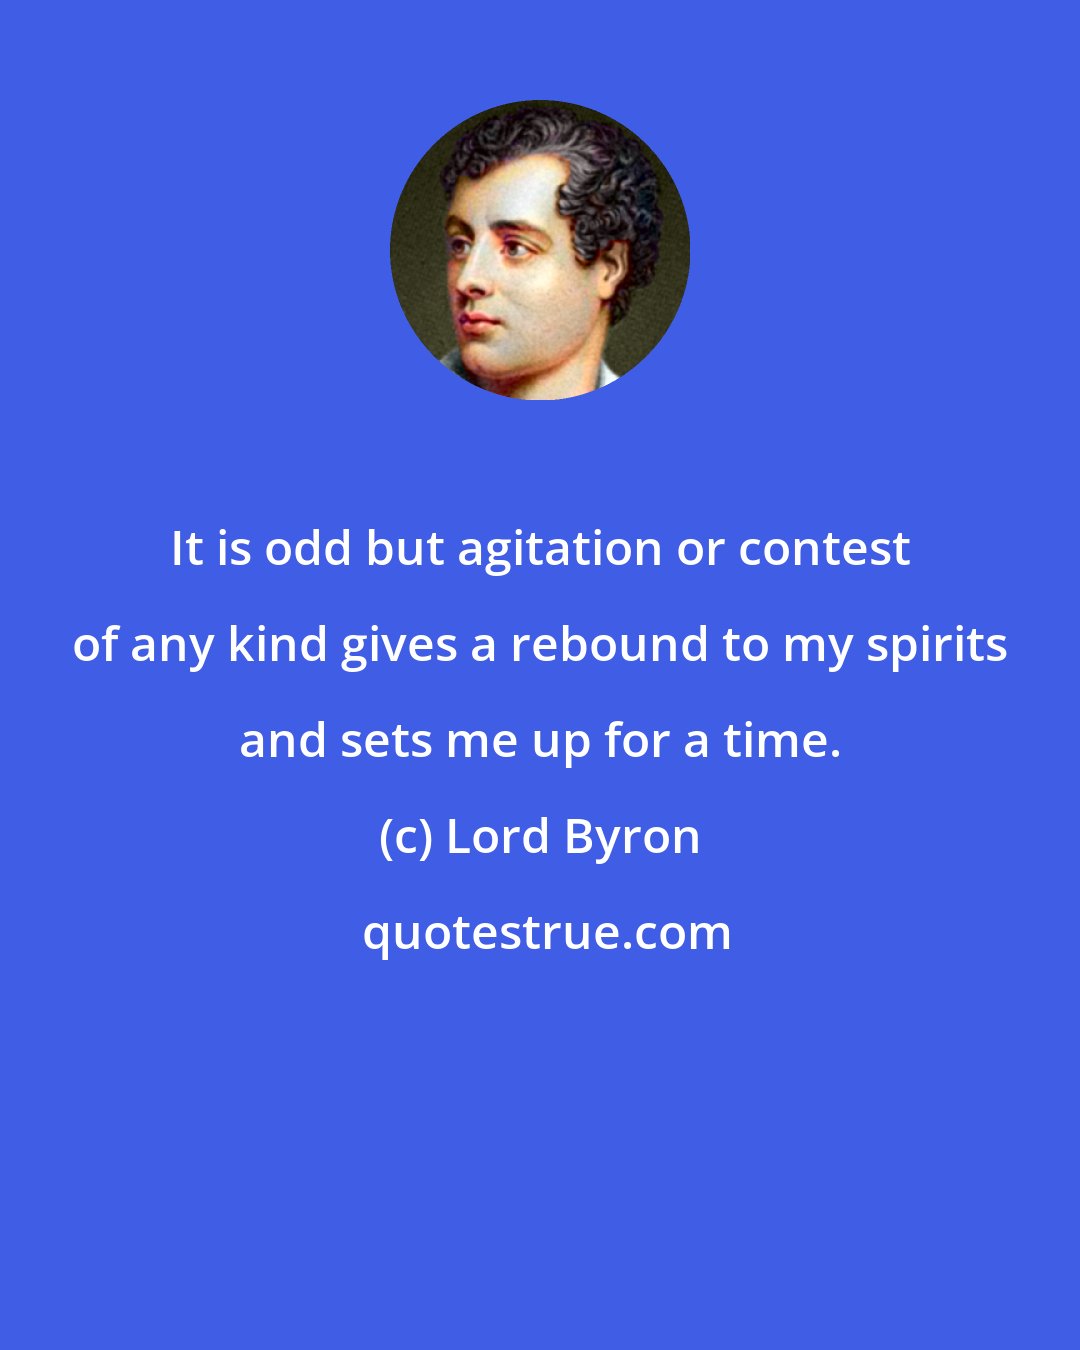 Lord Byron: It is odd but agitation or contest of any kind gives a rebound to my spirits and sets me up for a time.